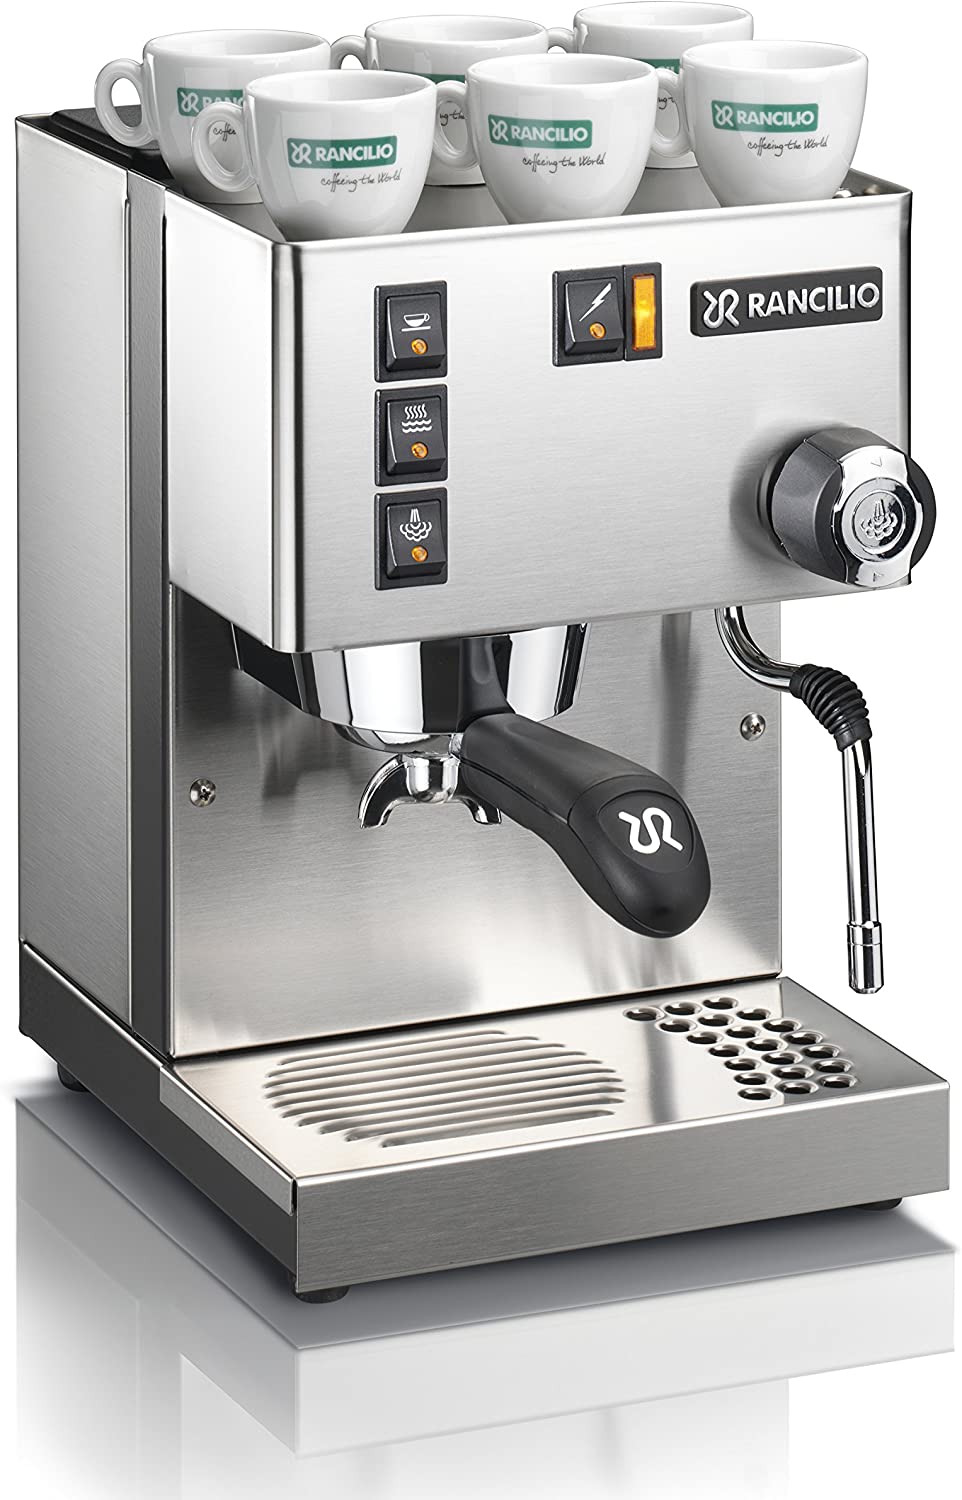 Espresso Machine with Iron Frame and Stainless Steel Side Panels